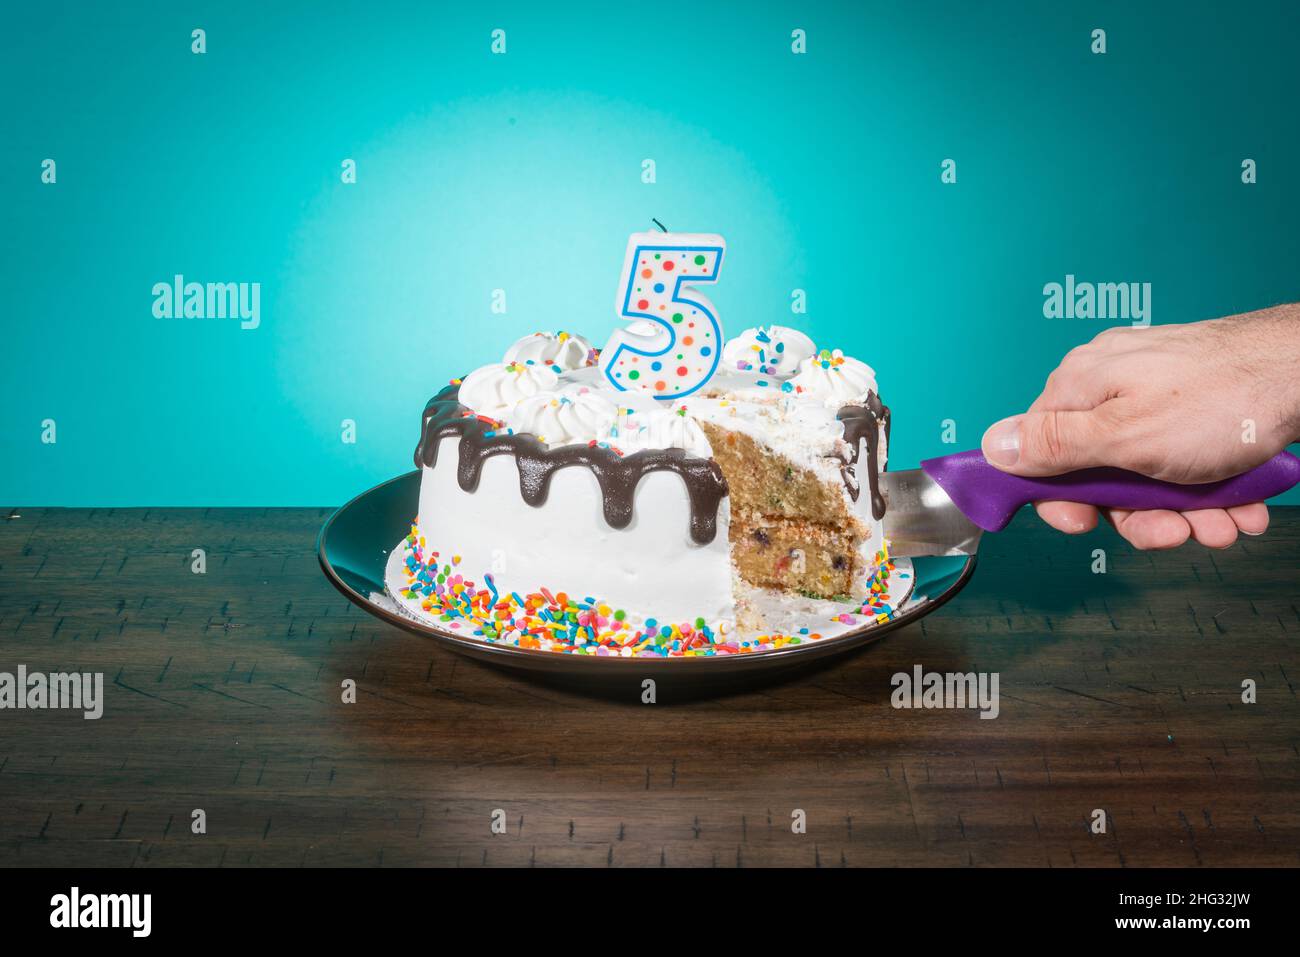 A birthday cake, missing a slice, bears a candle in the shape of the number 5 while a hand cuts another slice. Stock Photo